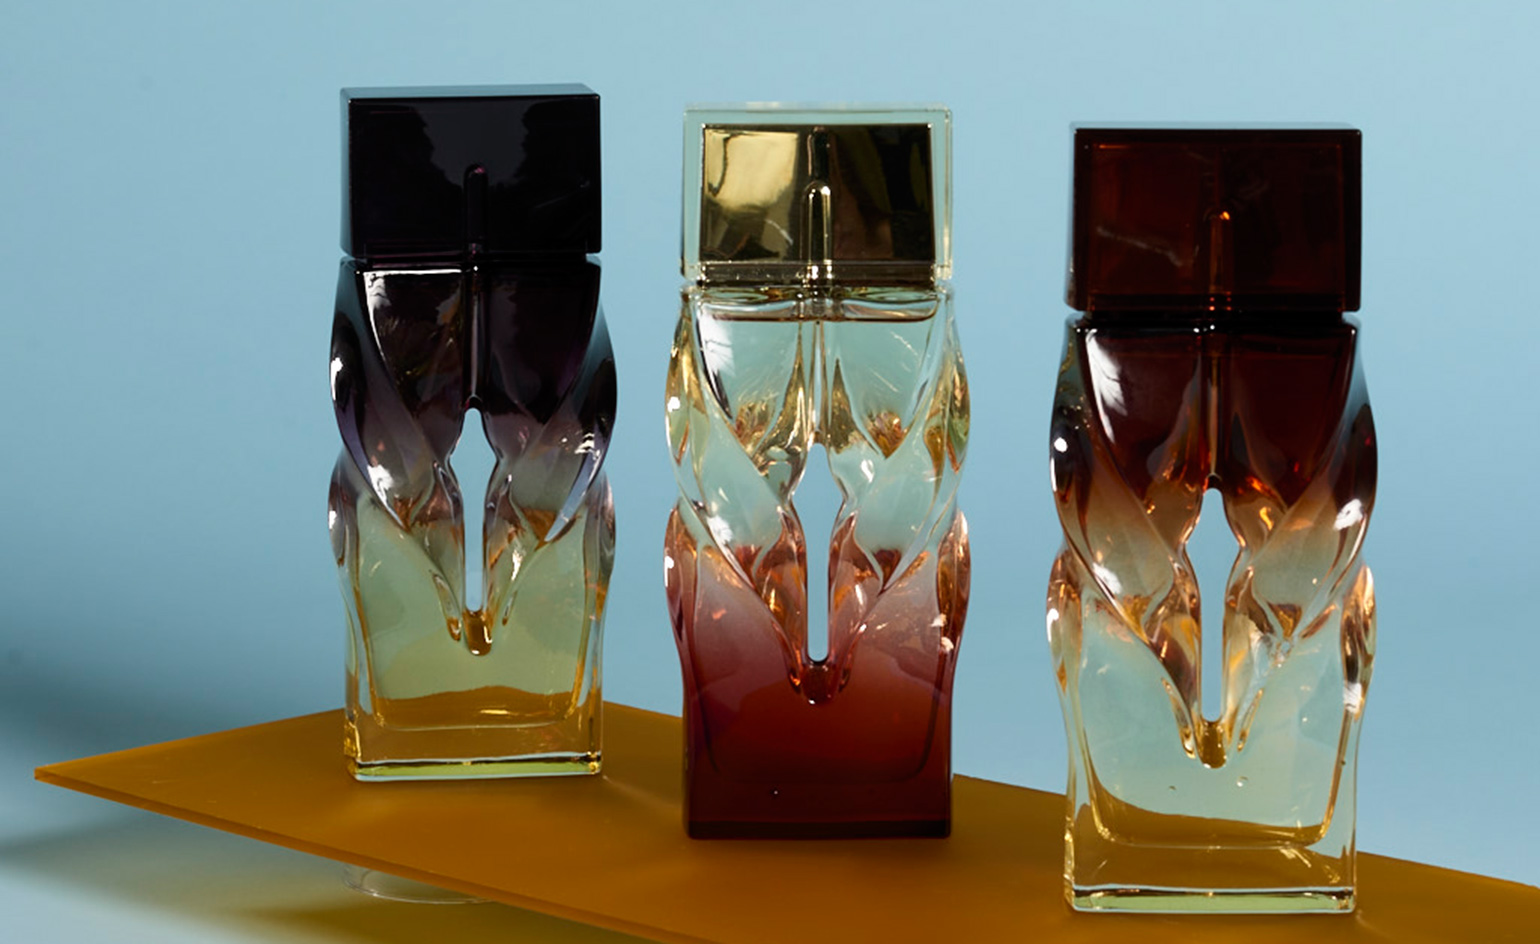 Industrial Design Student Work: This Eye-Catching Perfume Bottle